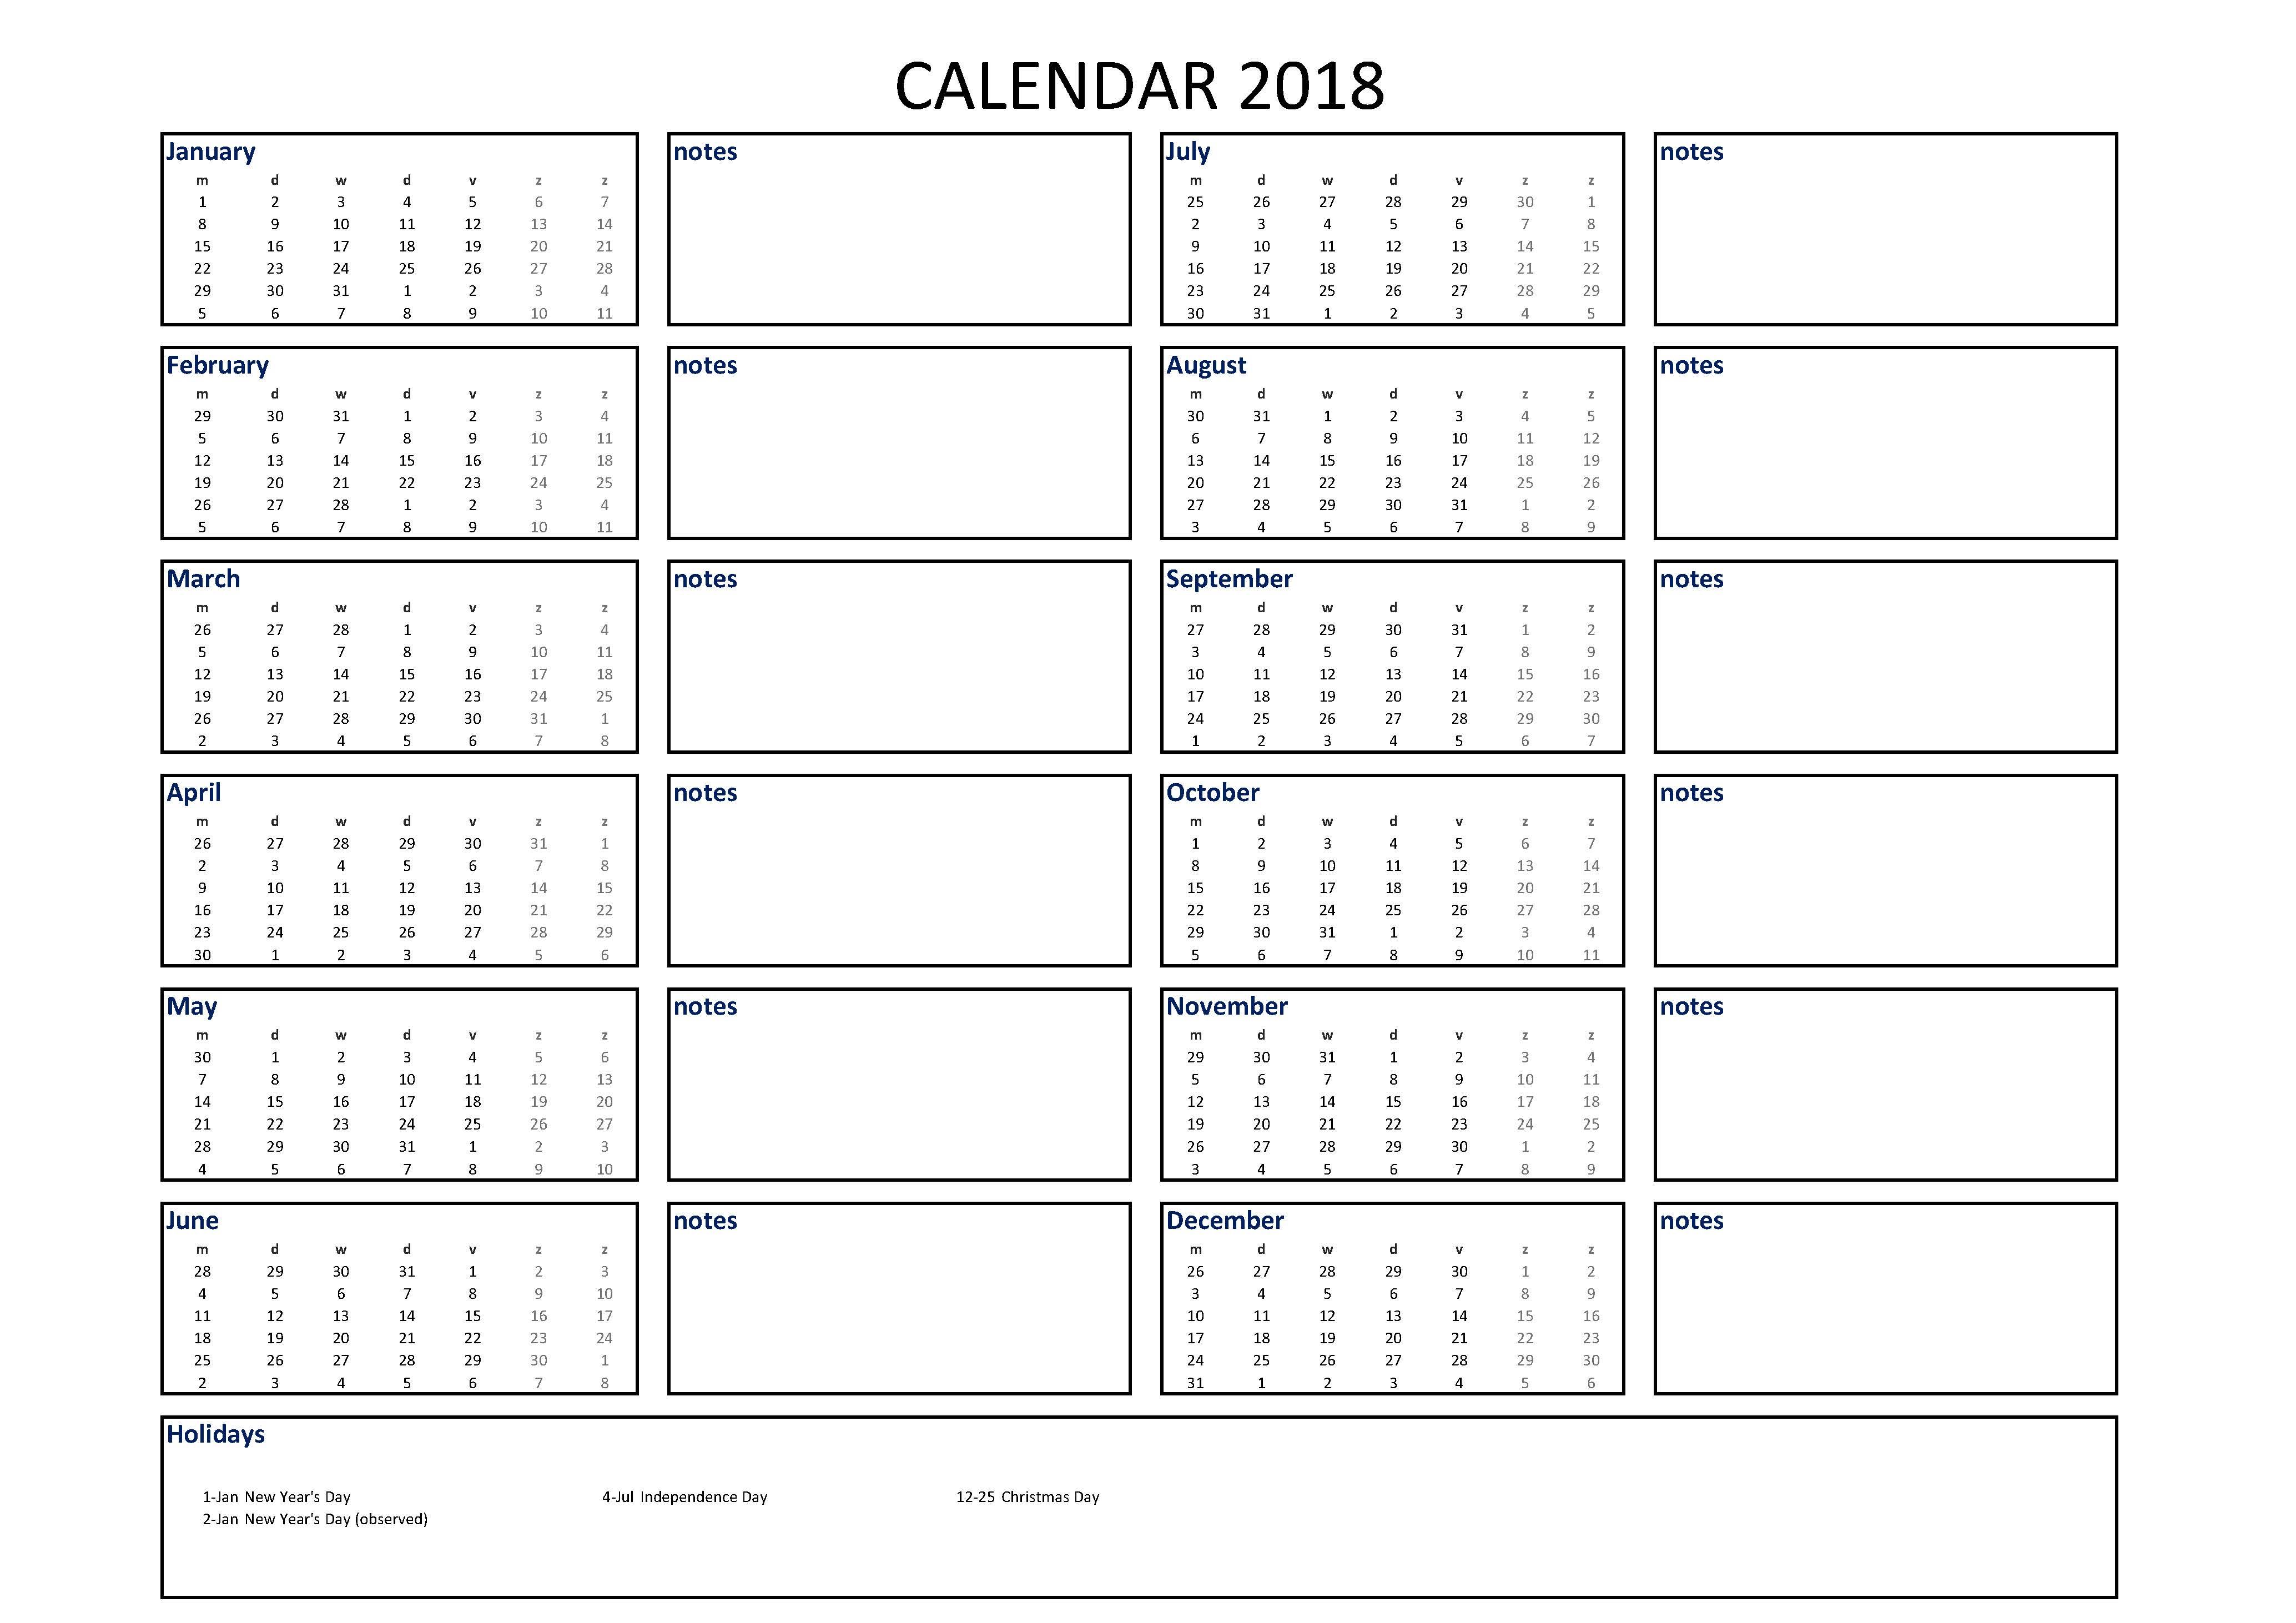 2018 Calendar Excel A4 size with notes main image